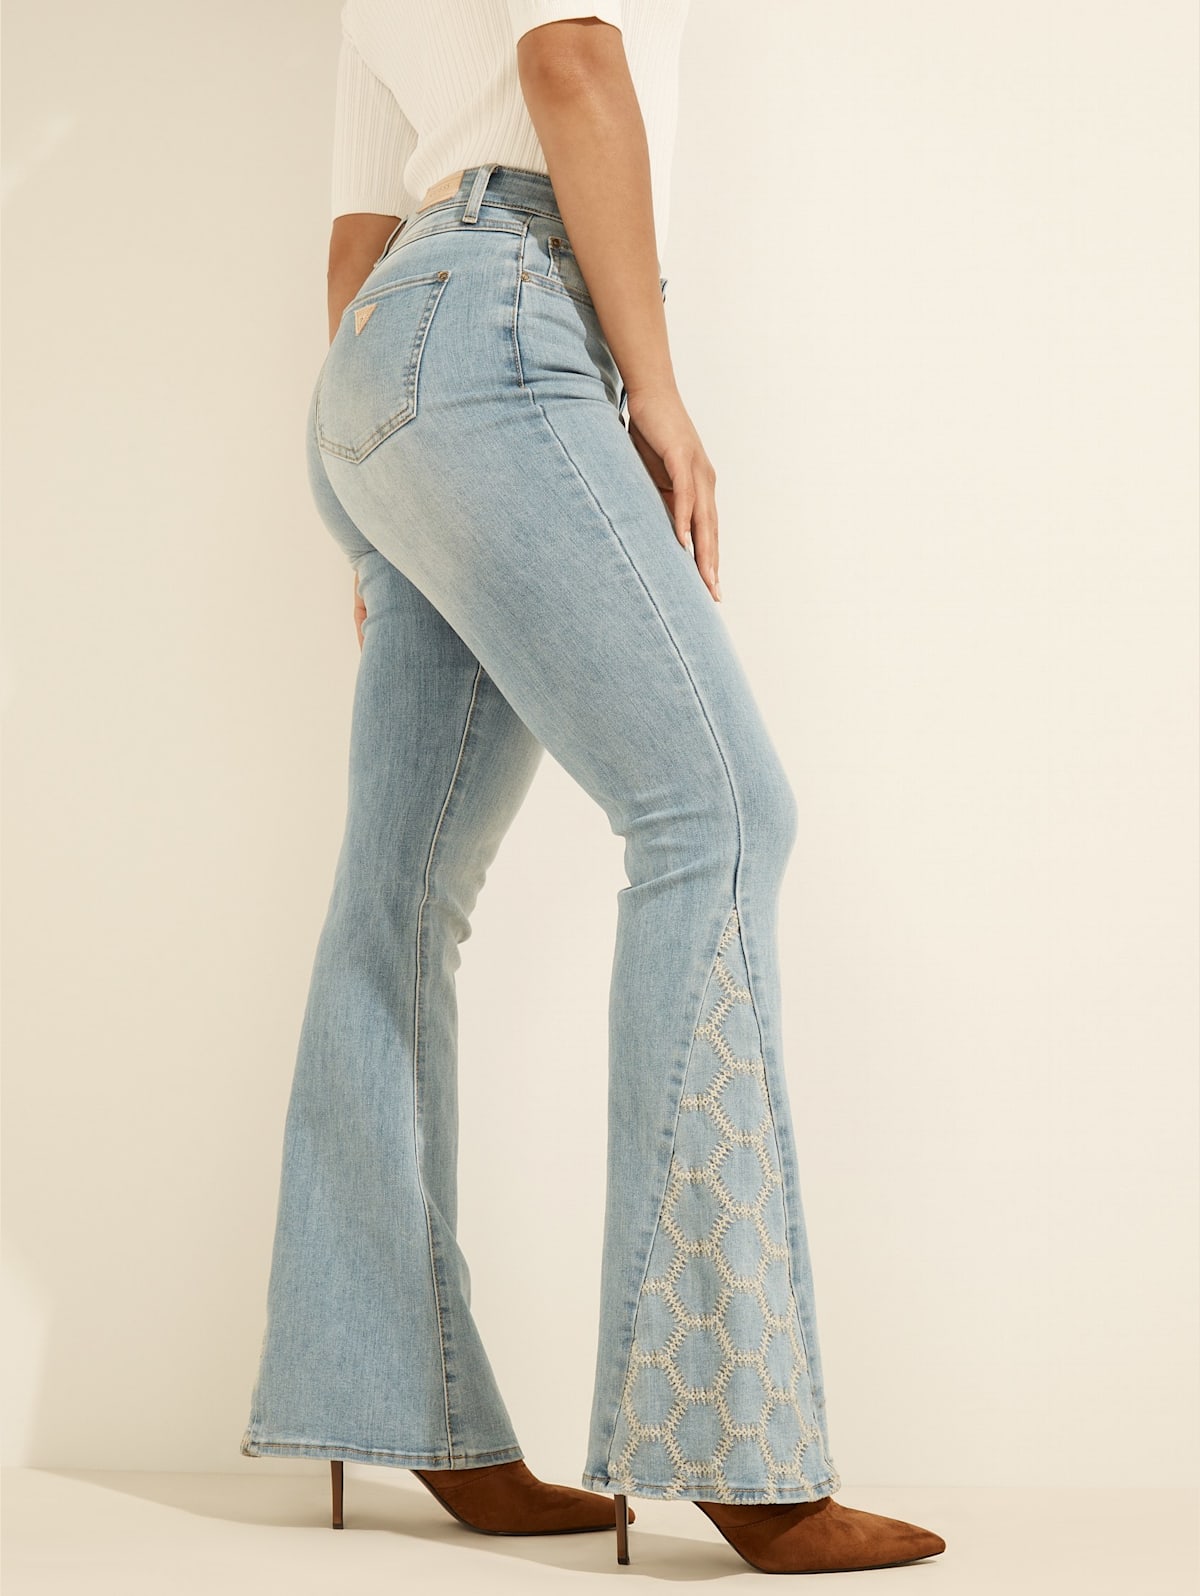 uberørt politi Parcel 1981 Embroidered Inset Fit-and-Flare Jeans | GUESS Canada